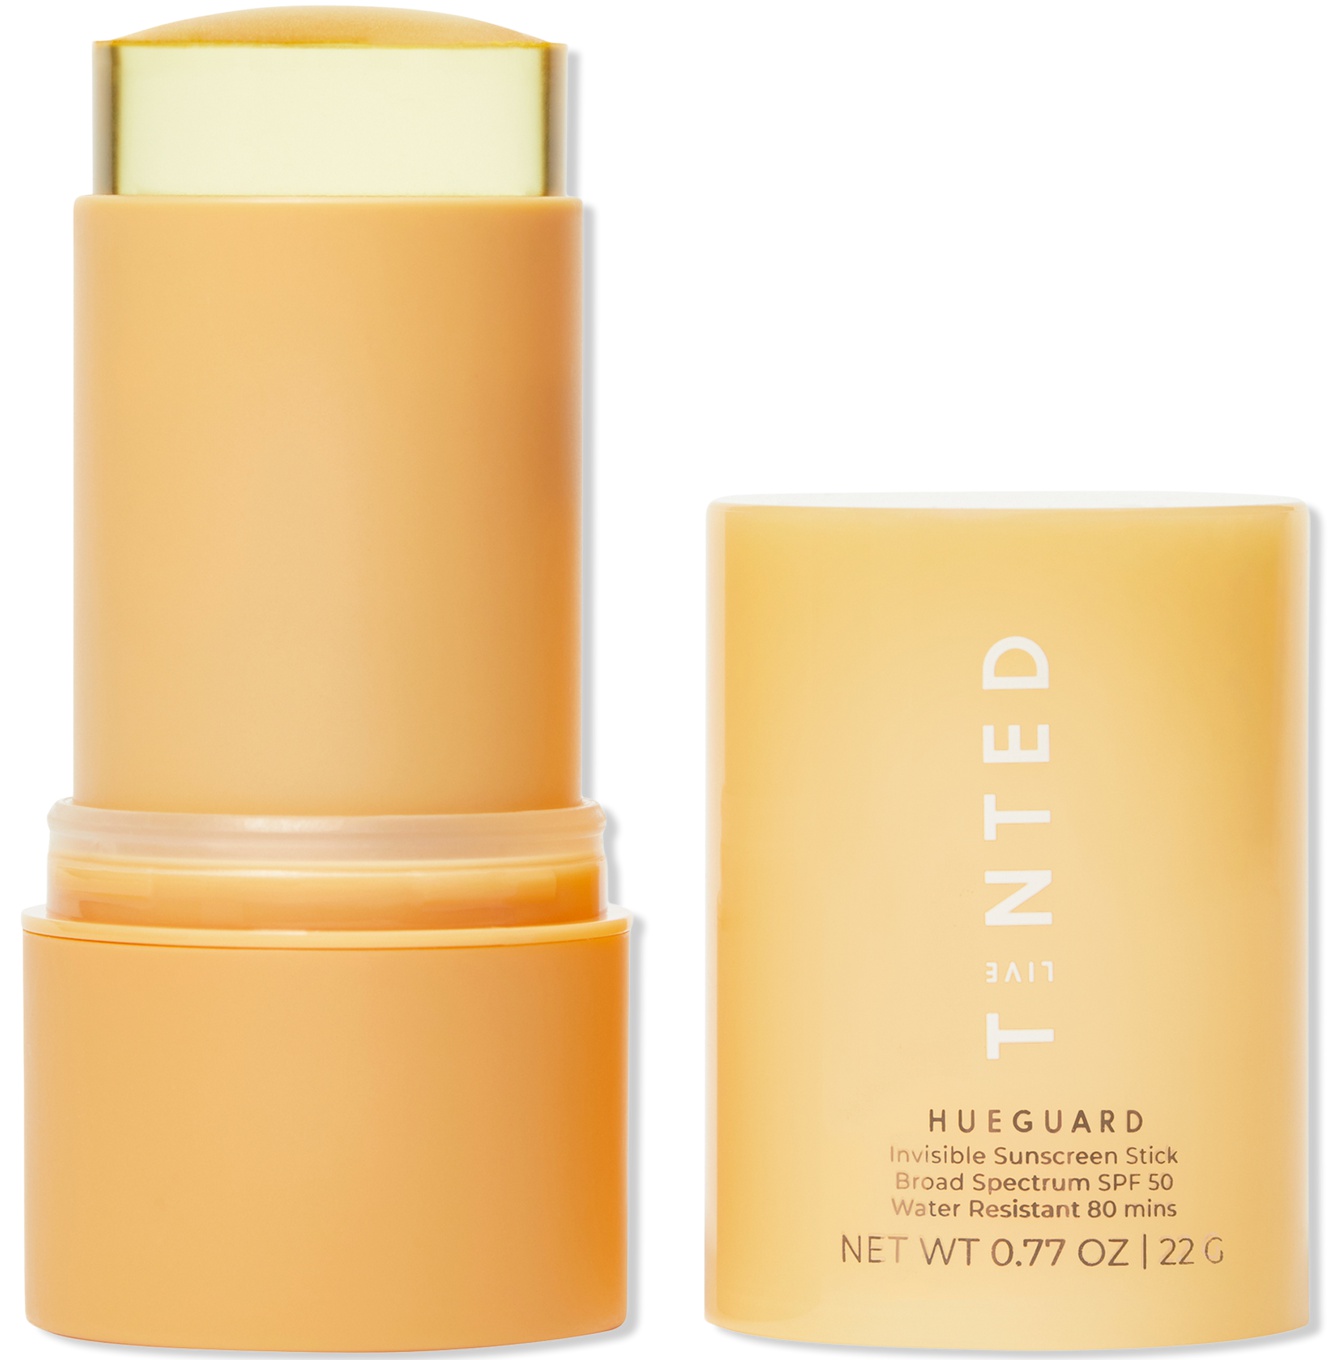 Live Tinted Hueguard Invisible Sunscreen Stick SPF 50